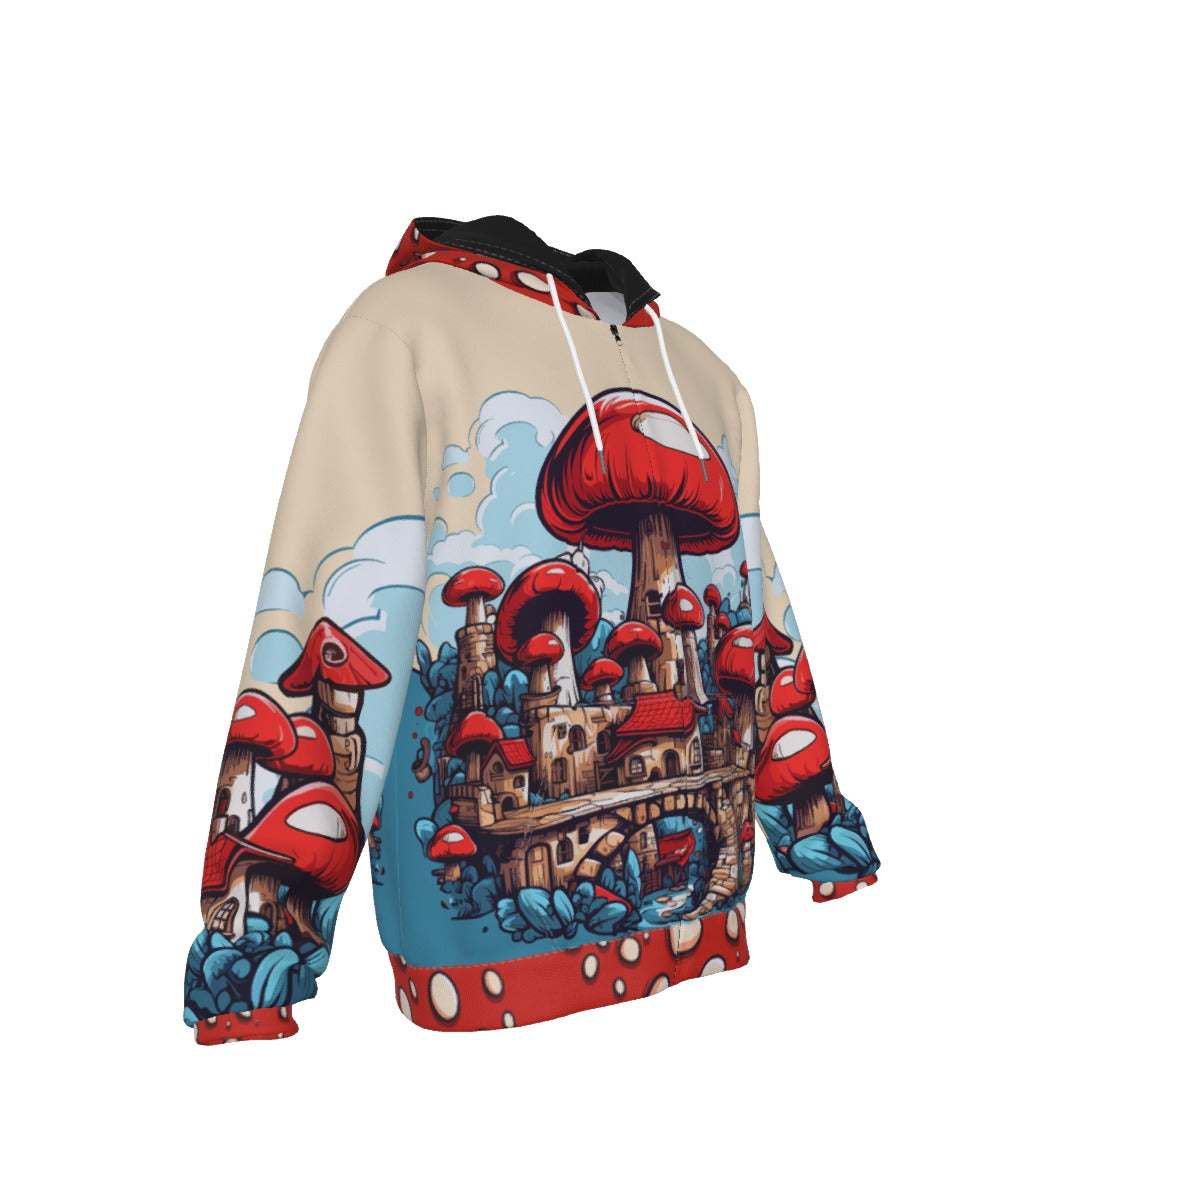 Enchanted Forest Red Mushroom Fantasy Zip-Up Hoodie – All-Over Print Fairy Tale Fungi Apparel – Magical Mushroom Art Jacket for Men & Women